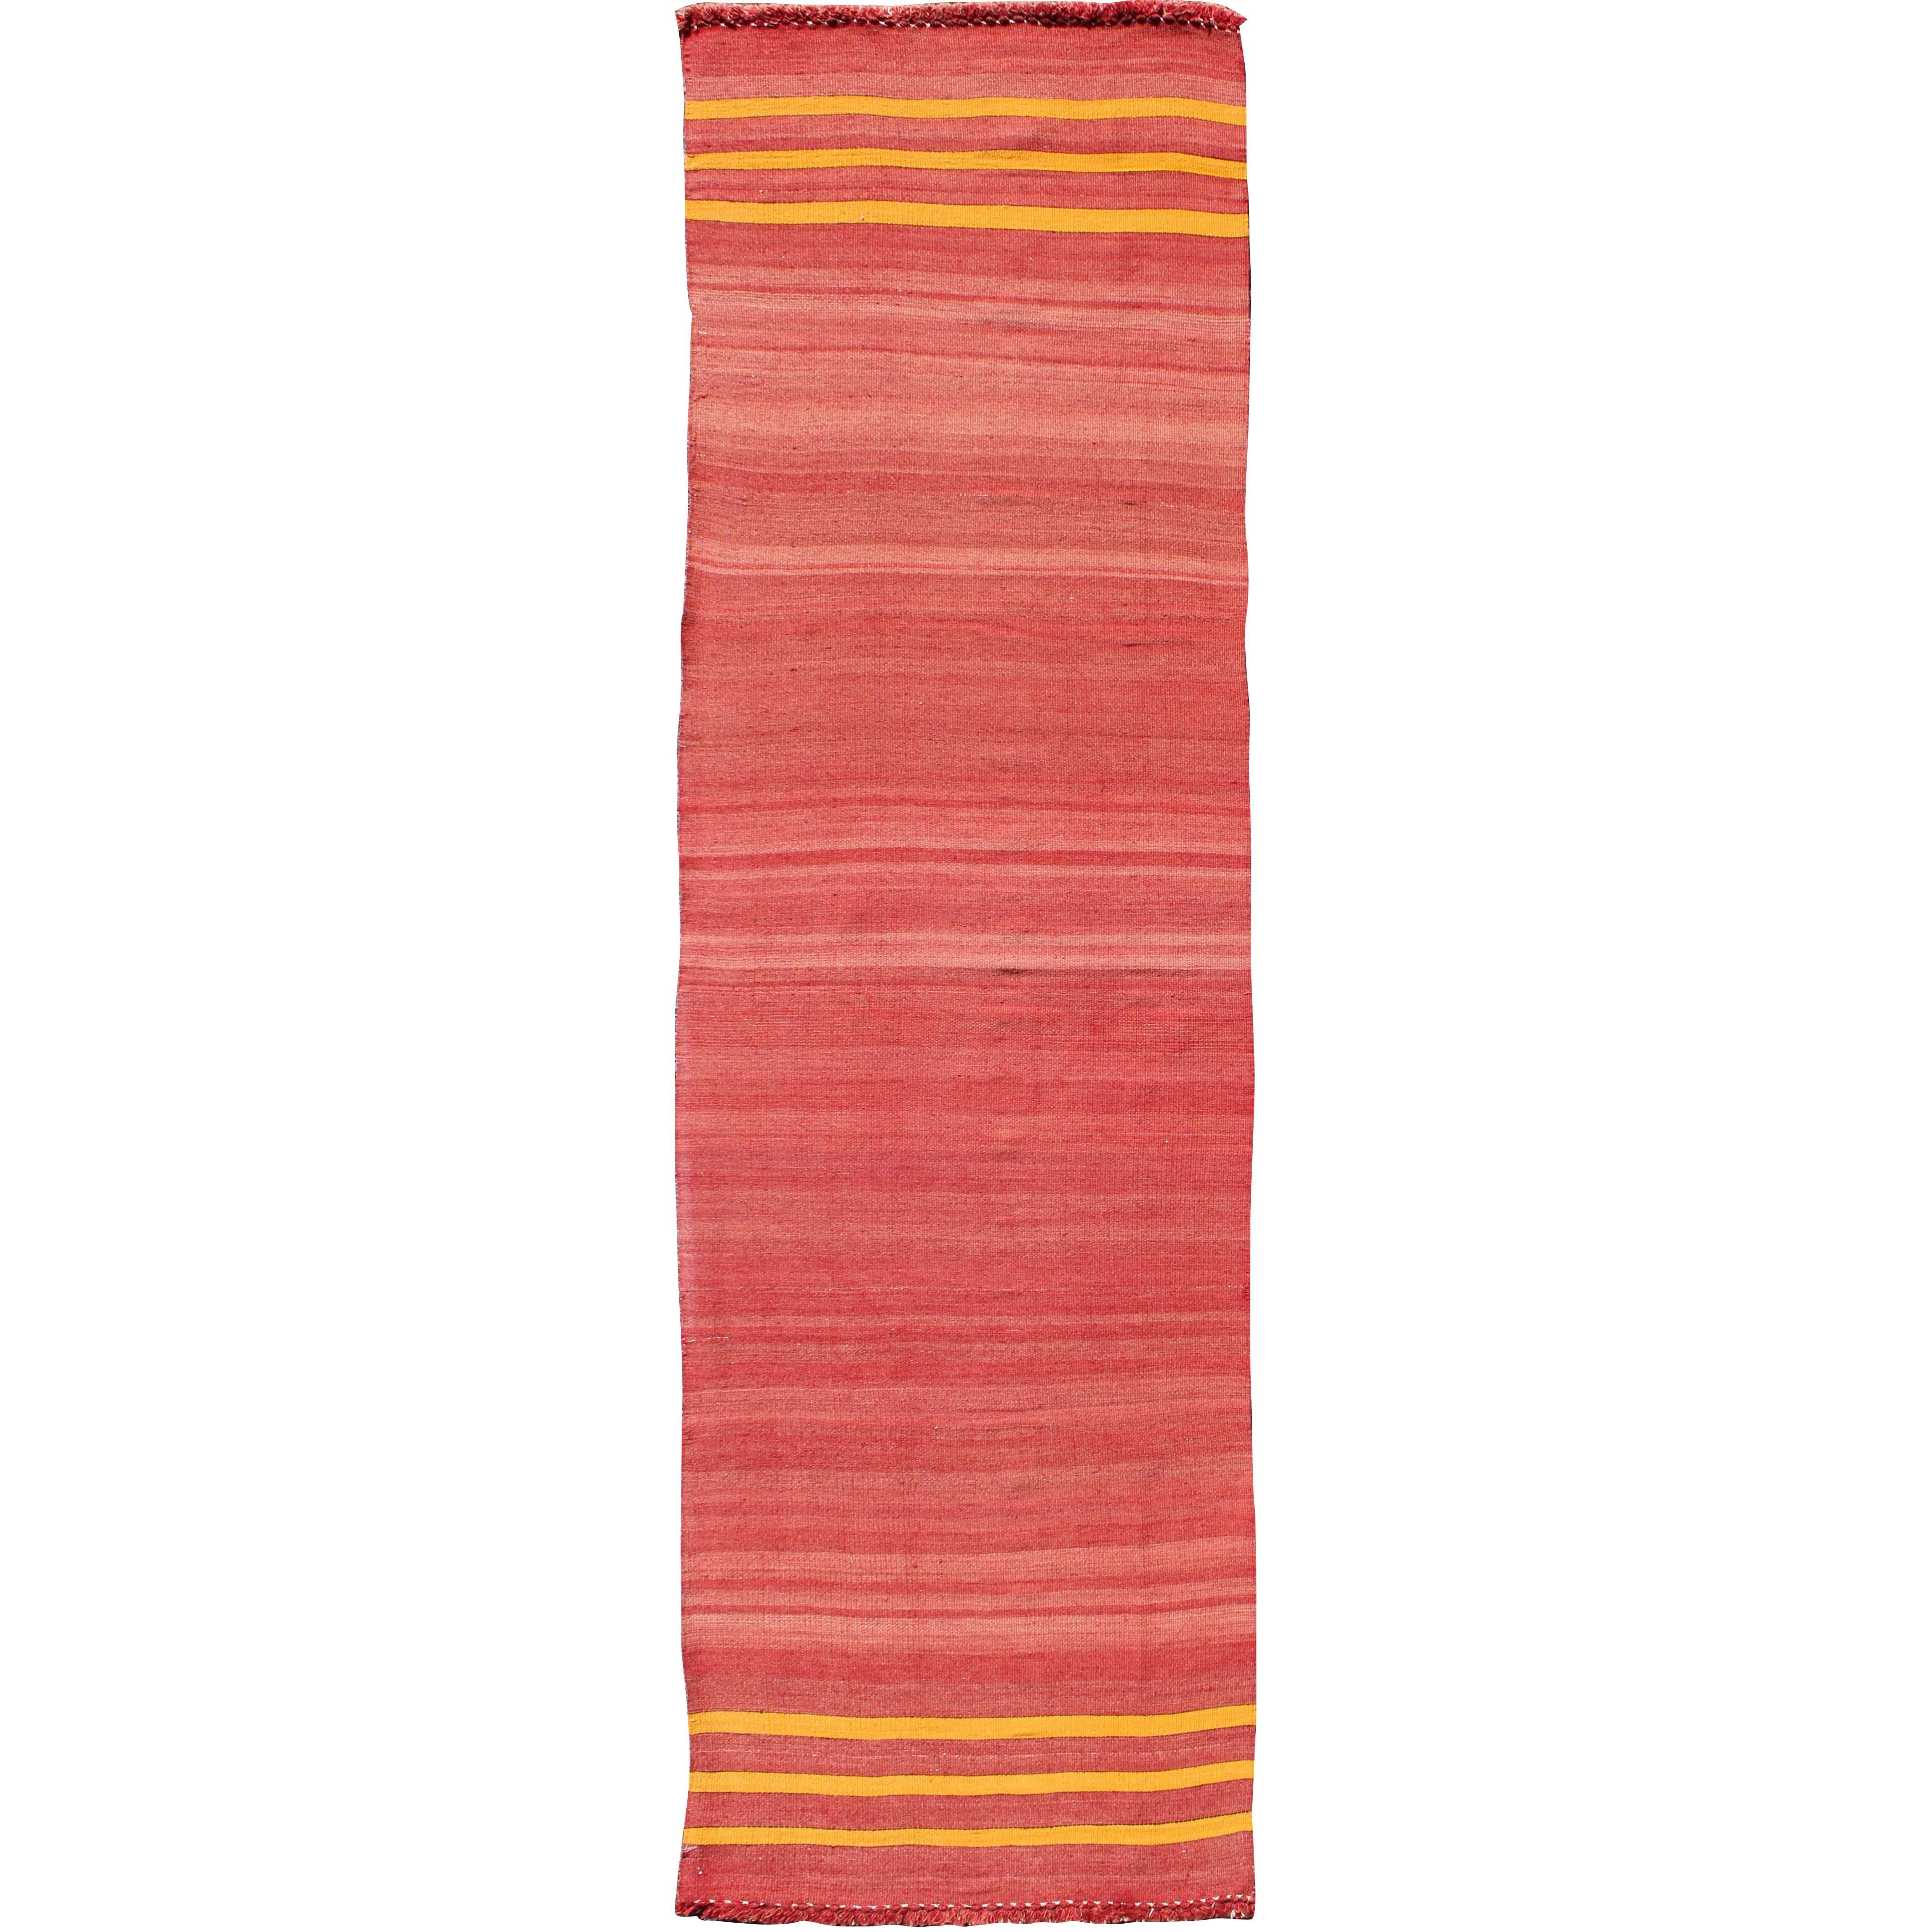 Red, Yellow, and Salmon Pink Striped Midcentury Vintage Turkish Kilim Rug For Sale